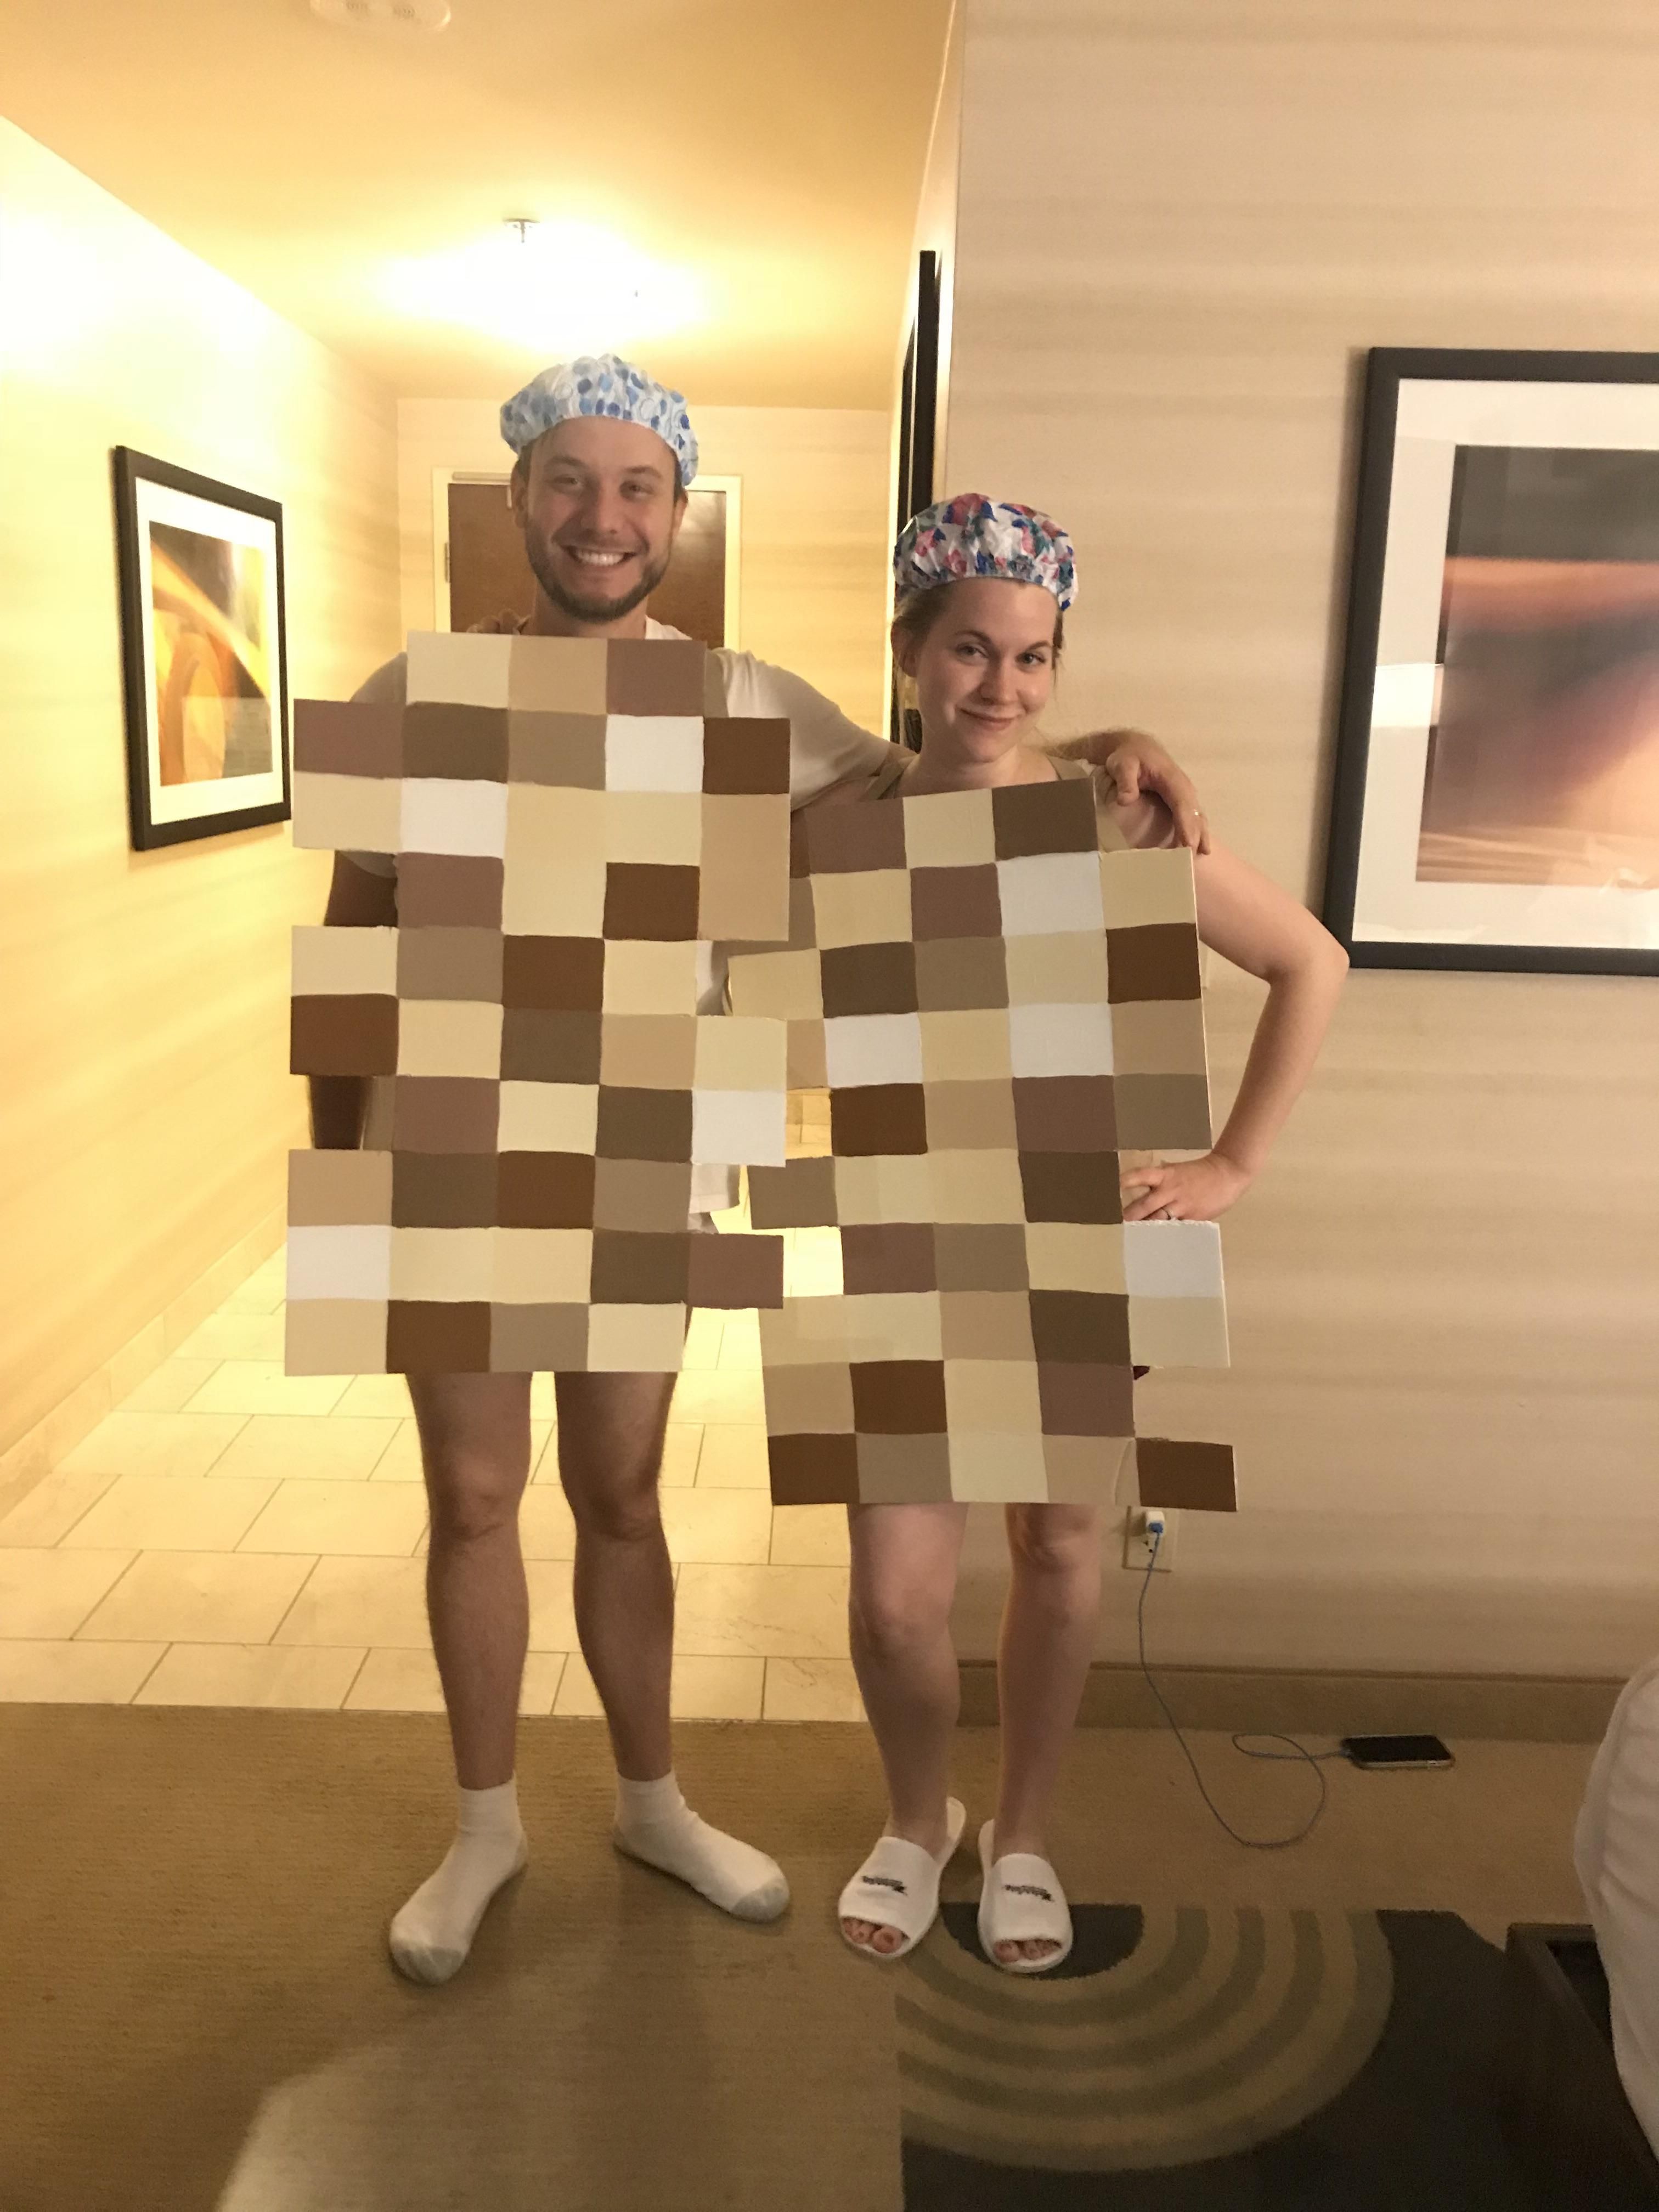 Me and my husband in our Halloween costumes as “pixelated naked people.”